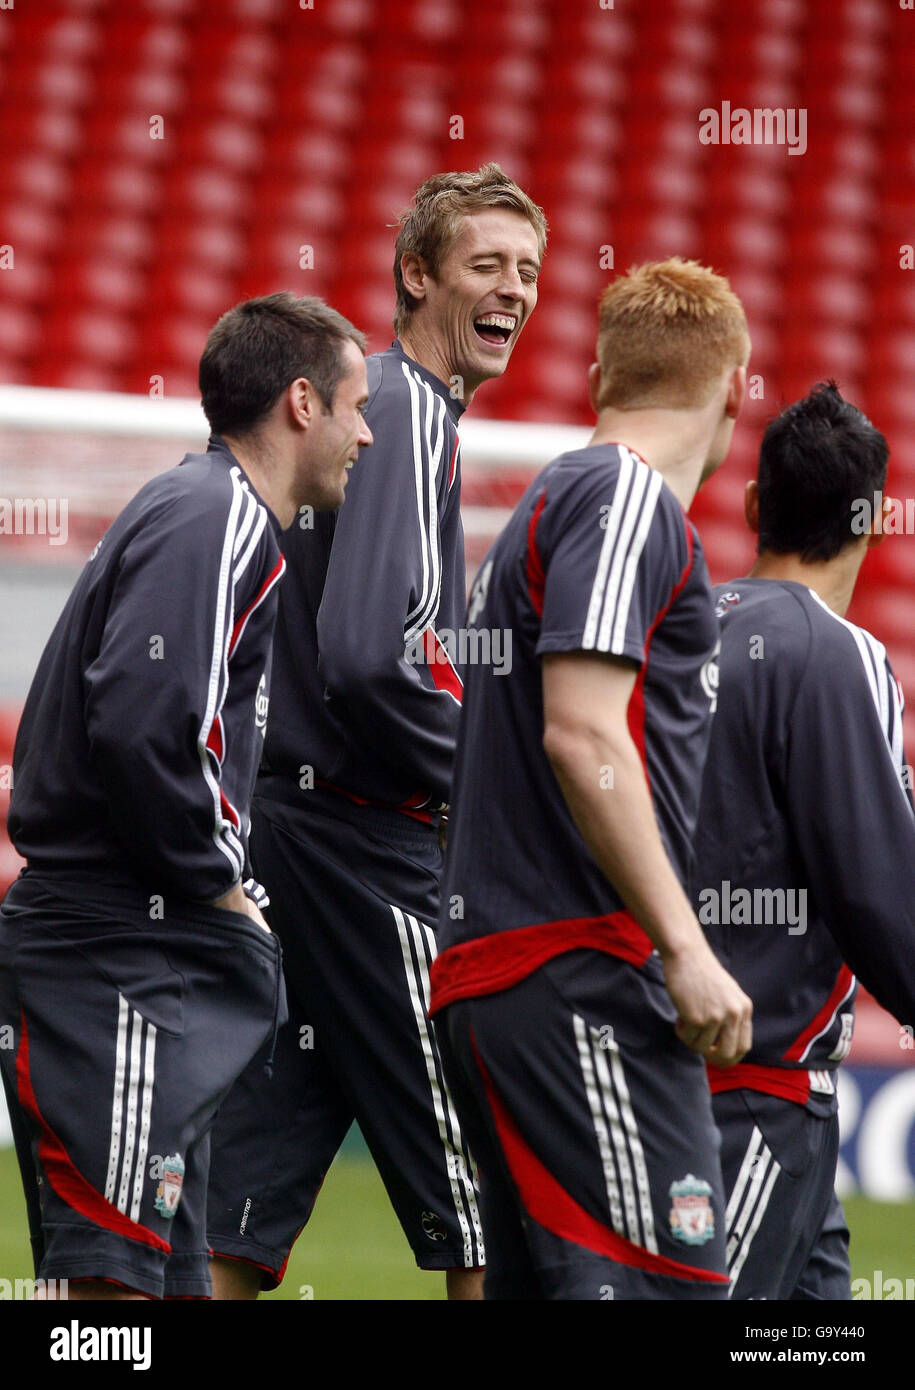 Liverpool's Peter Crouch (centre) laughs with Jamie Carragher (left) and John Arne Riise during a training session at Anfield, Liverpool. Stock Photo